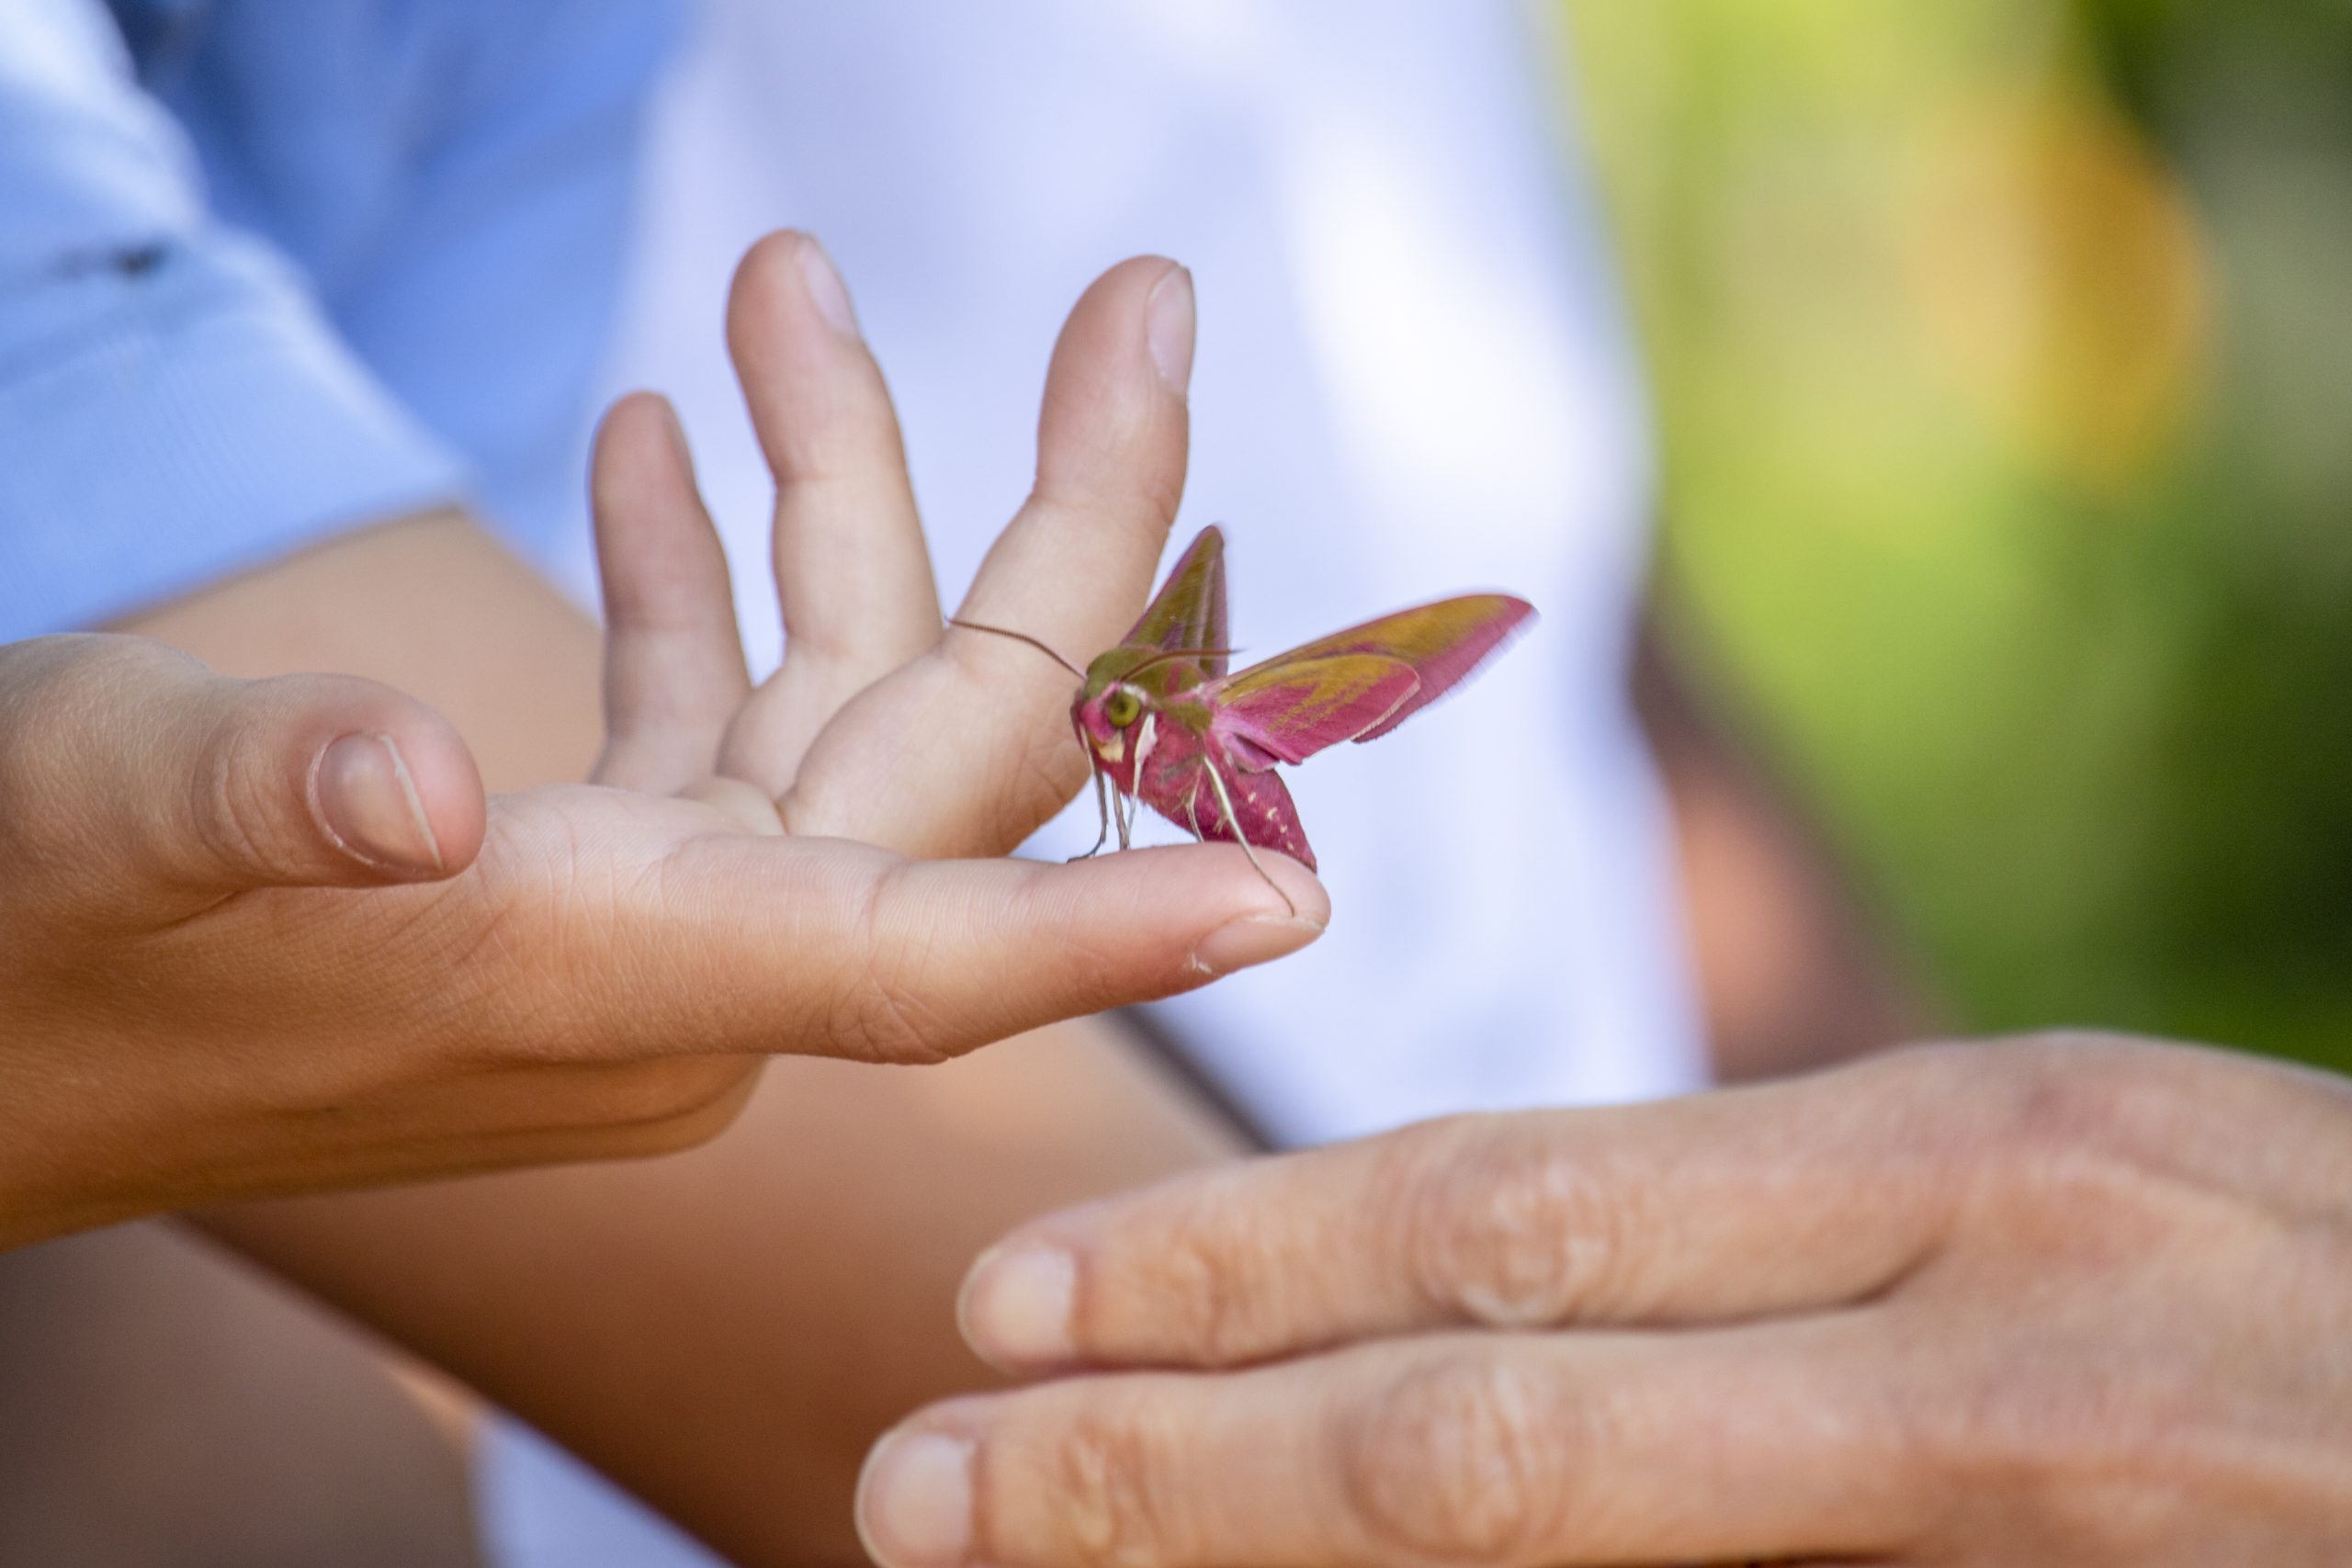 A small pink and yellow moth sits on a child's finger.